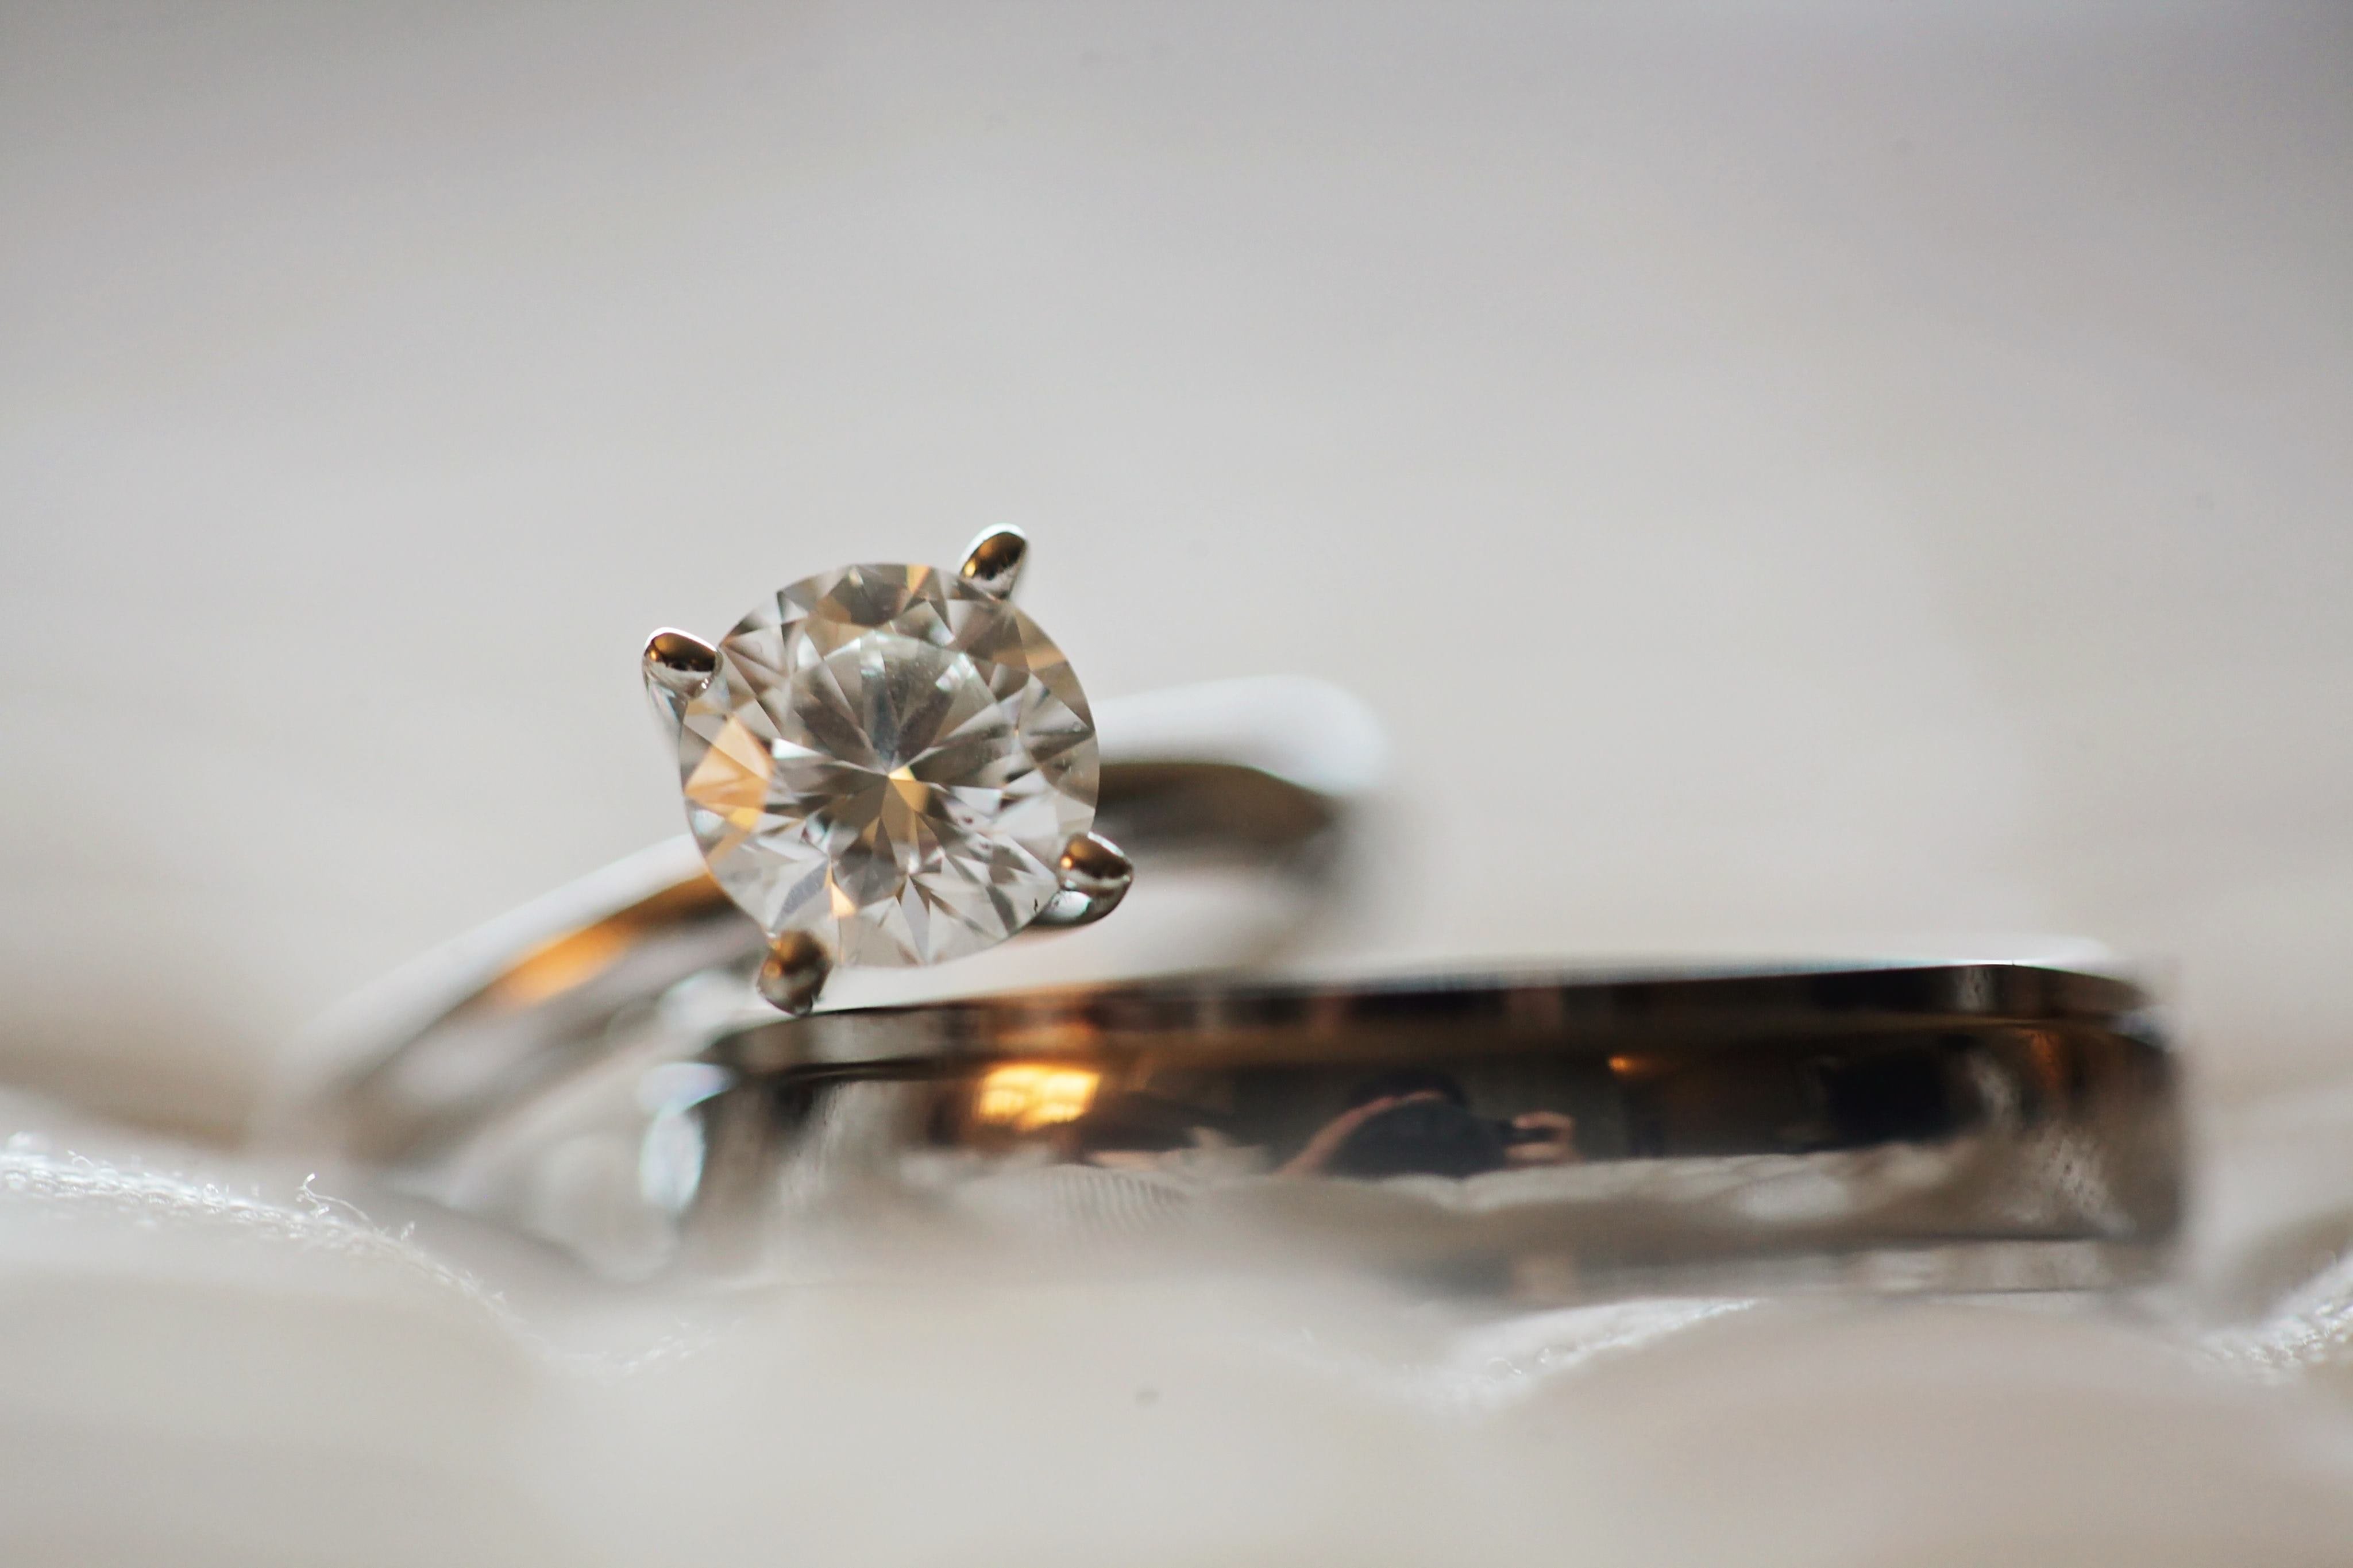 Wedding ring with diamond. | Source: Pexels/Leah